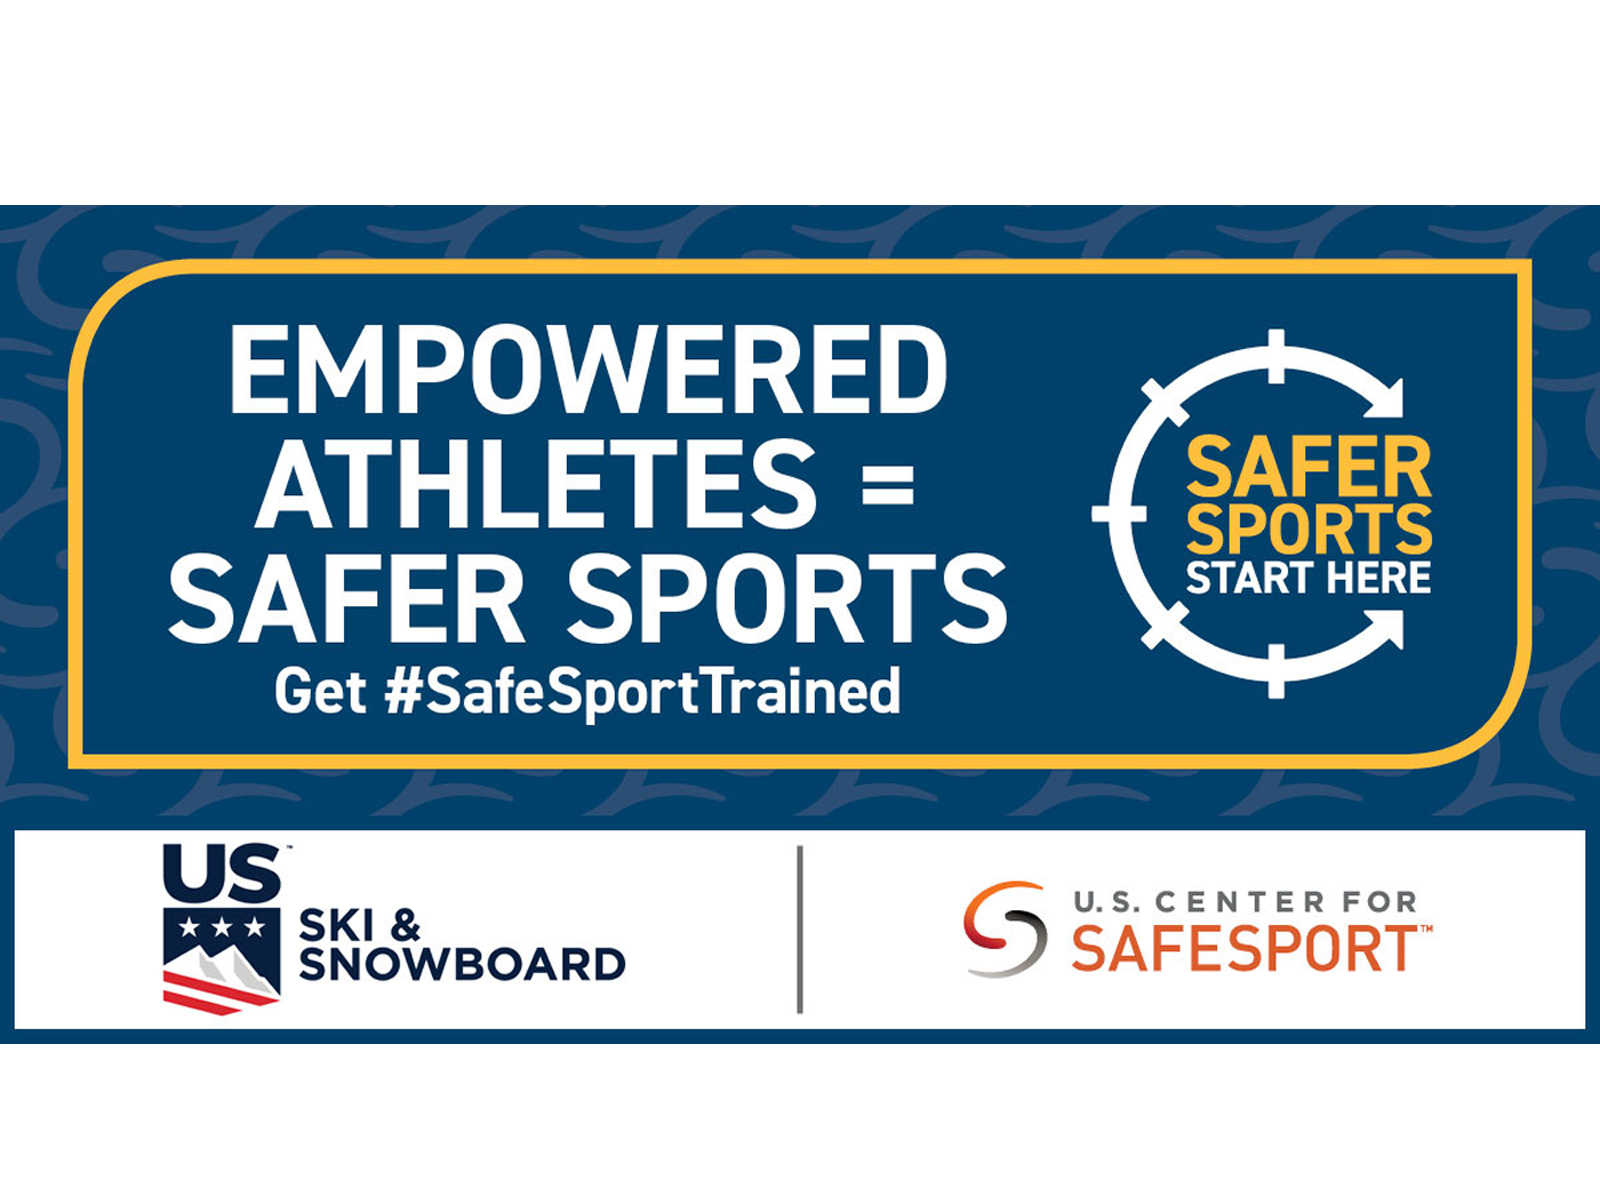 SafeSport and Athlete Safety